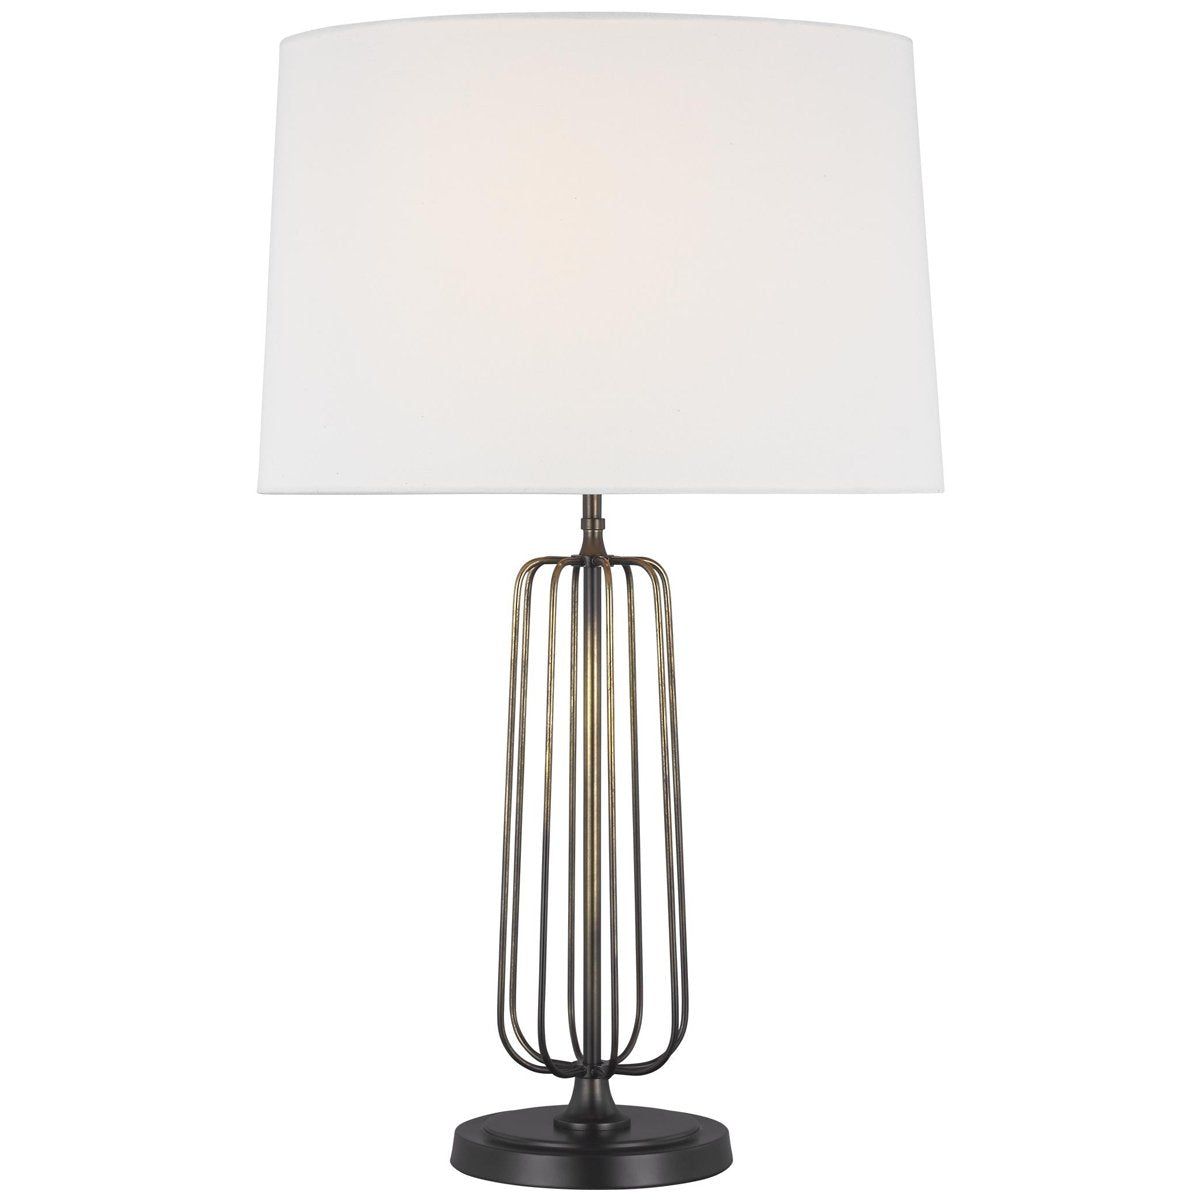 Feiss Milo Table Lamp